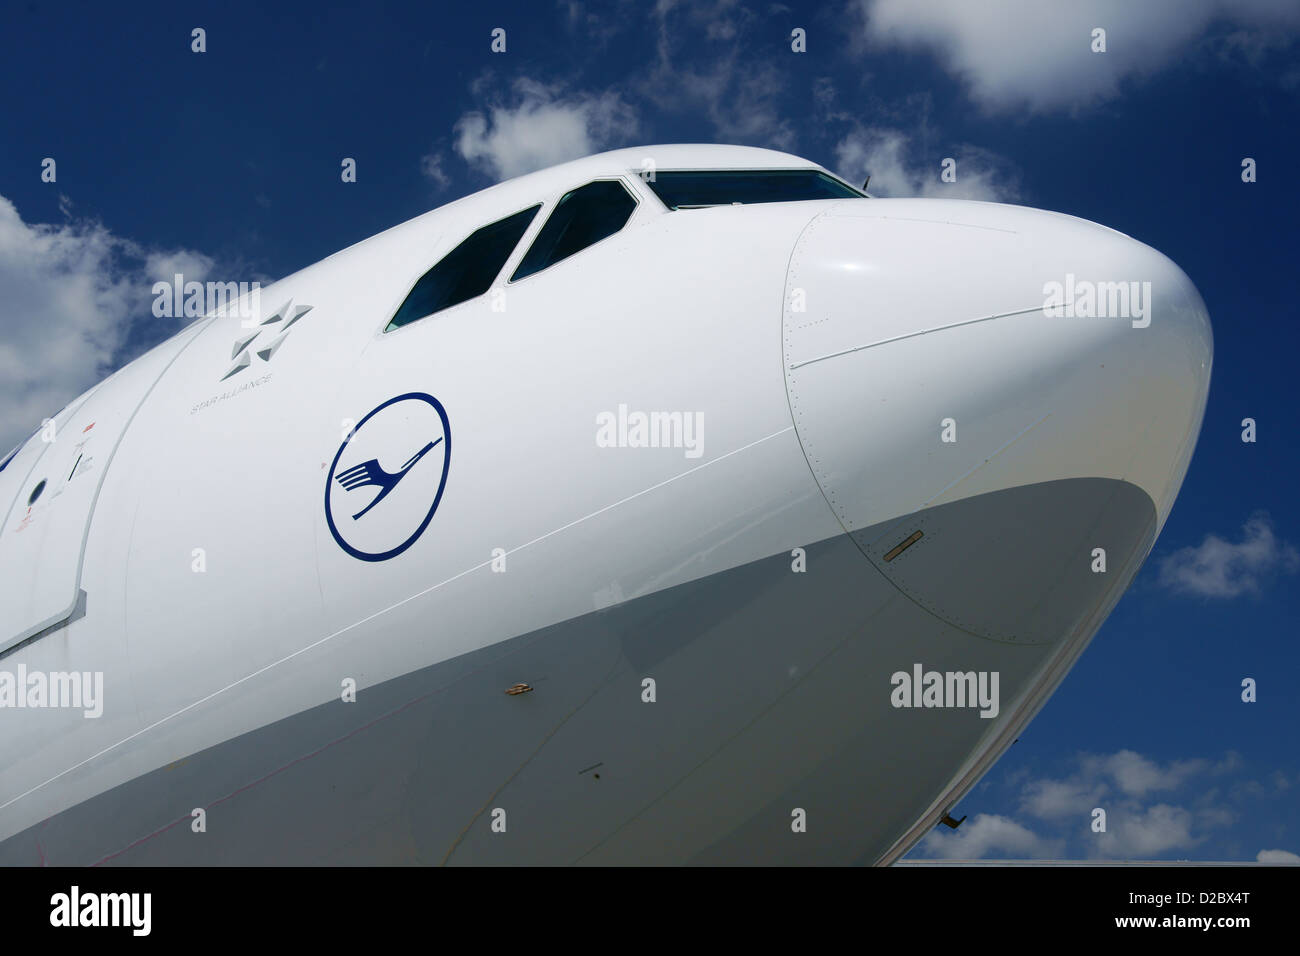 Aircraft, airplane, airbus, A 340, cockpit, Stock Photo